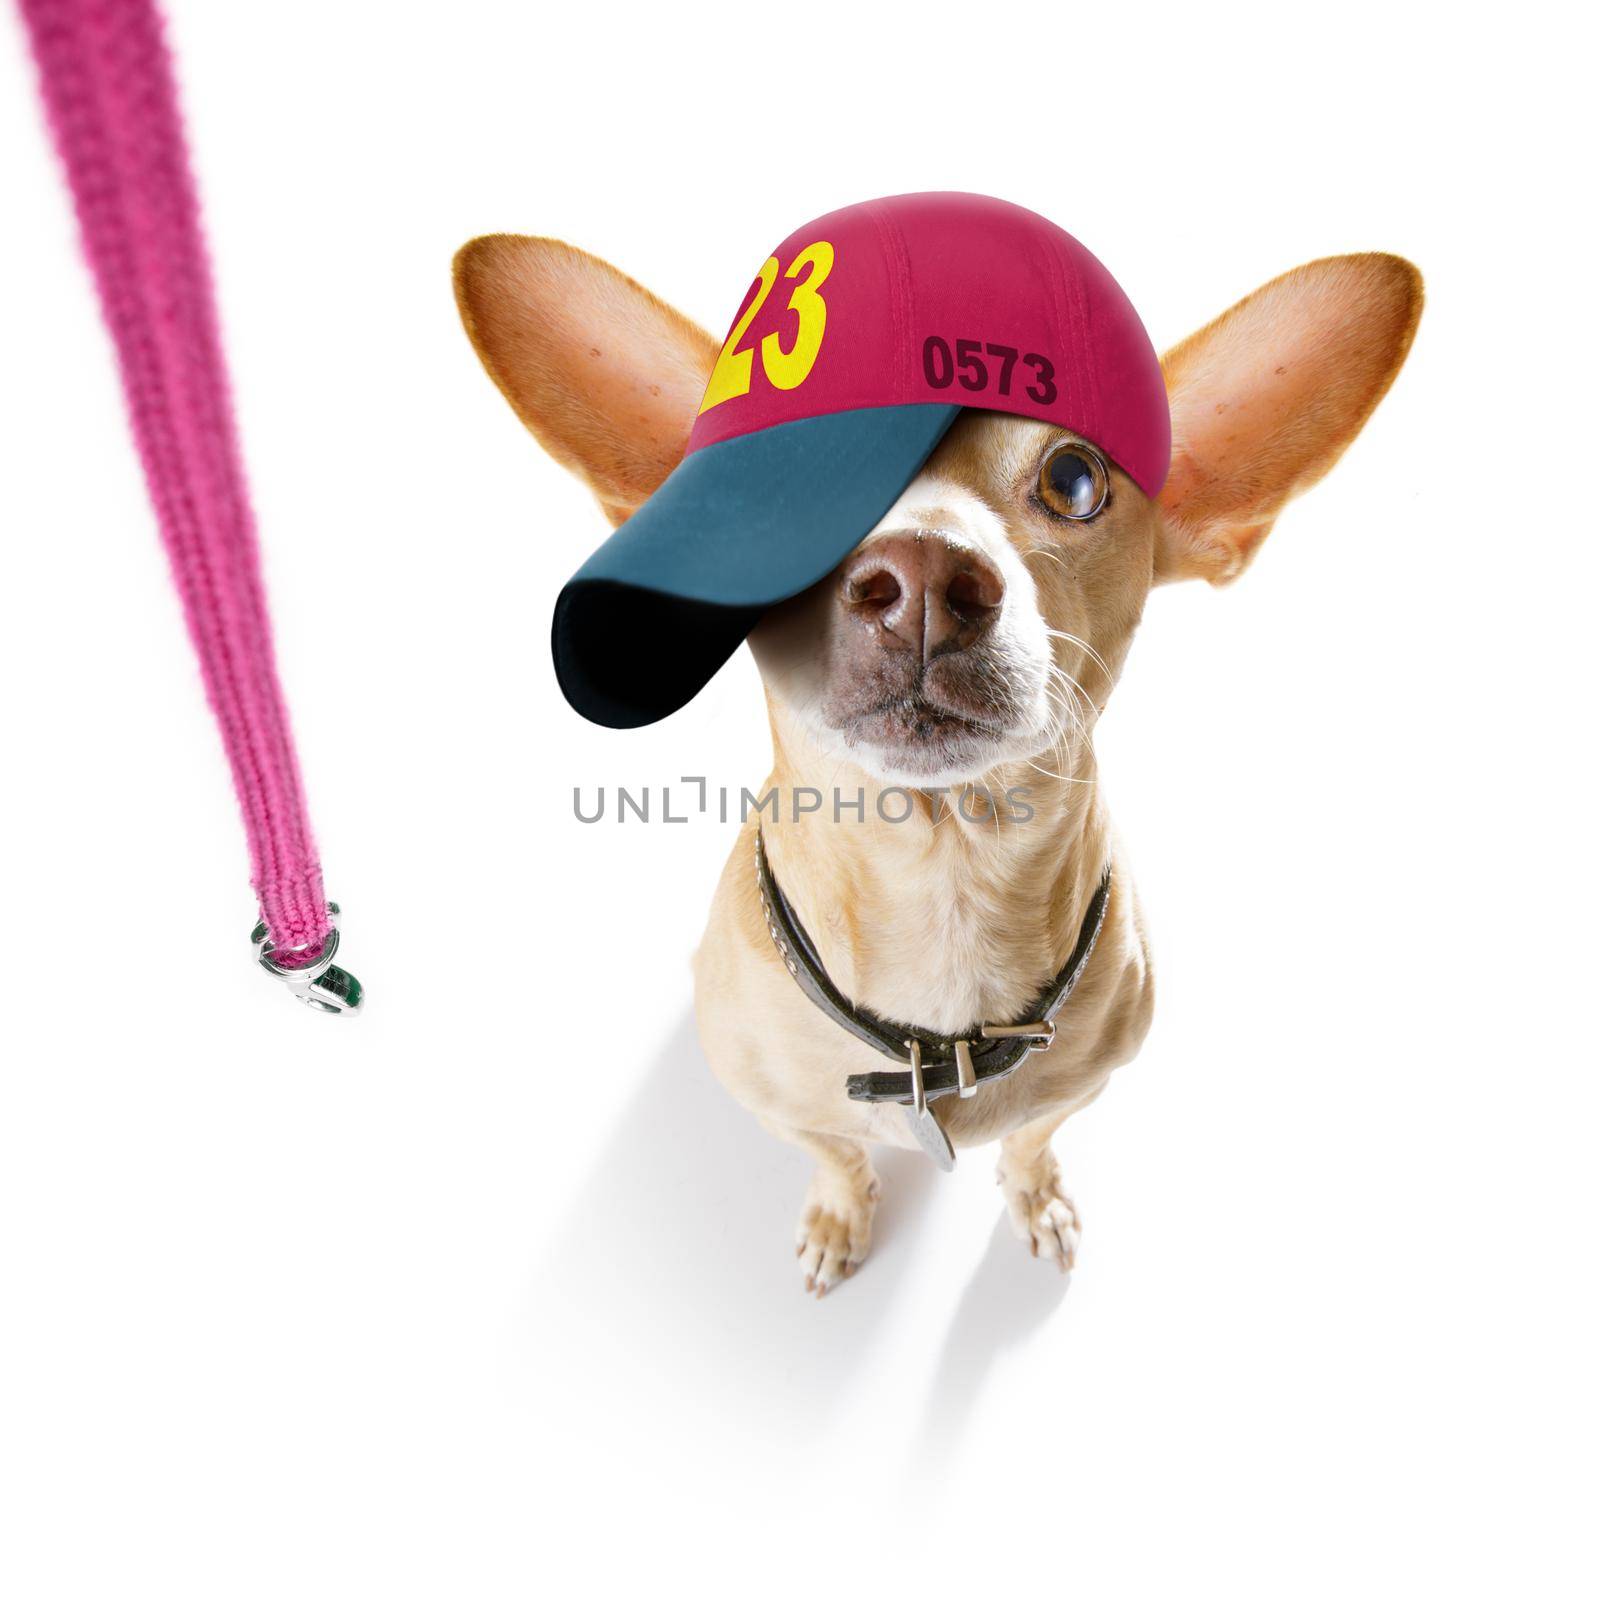 cool casual look chihuahua dog wearing a baseball cap or hat , sporty and fit ,ready to walk with leash